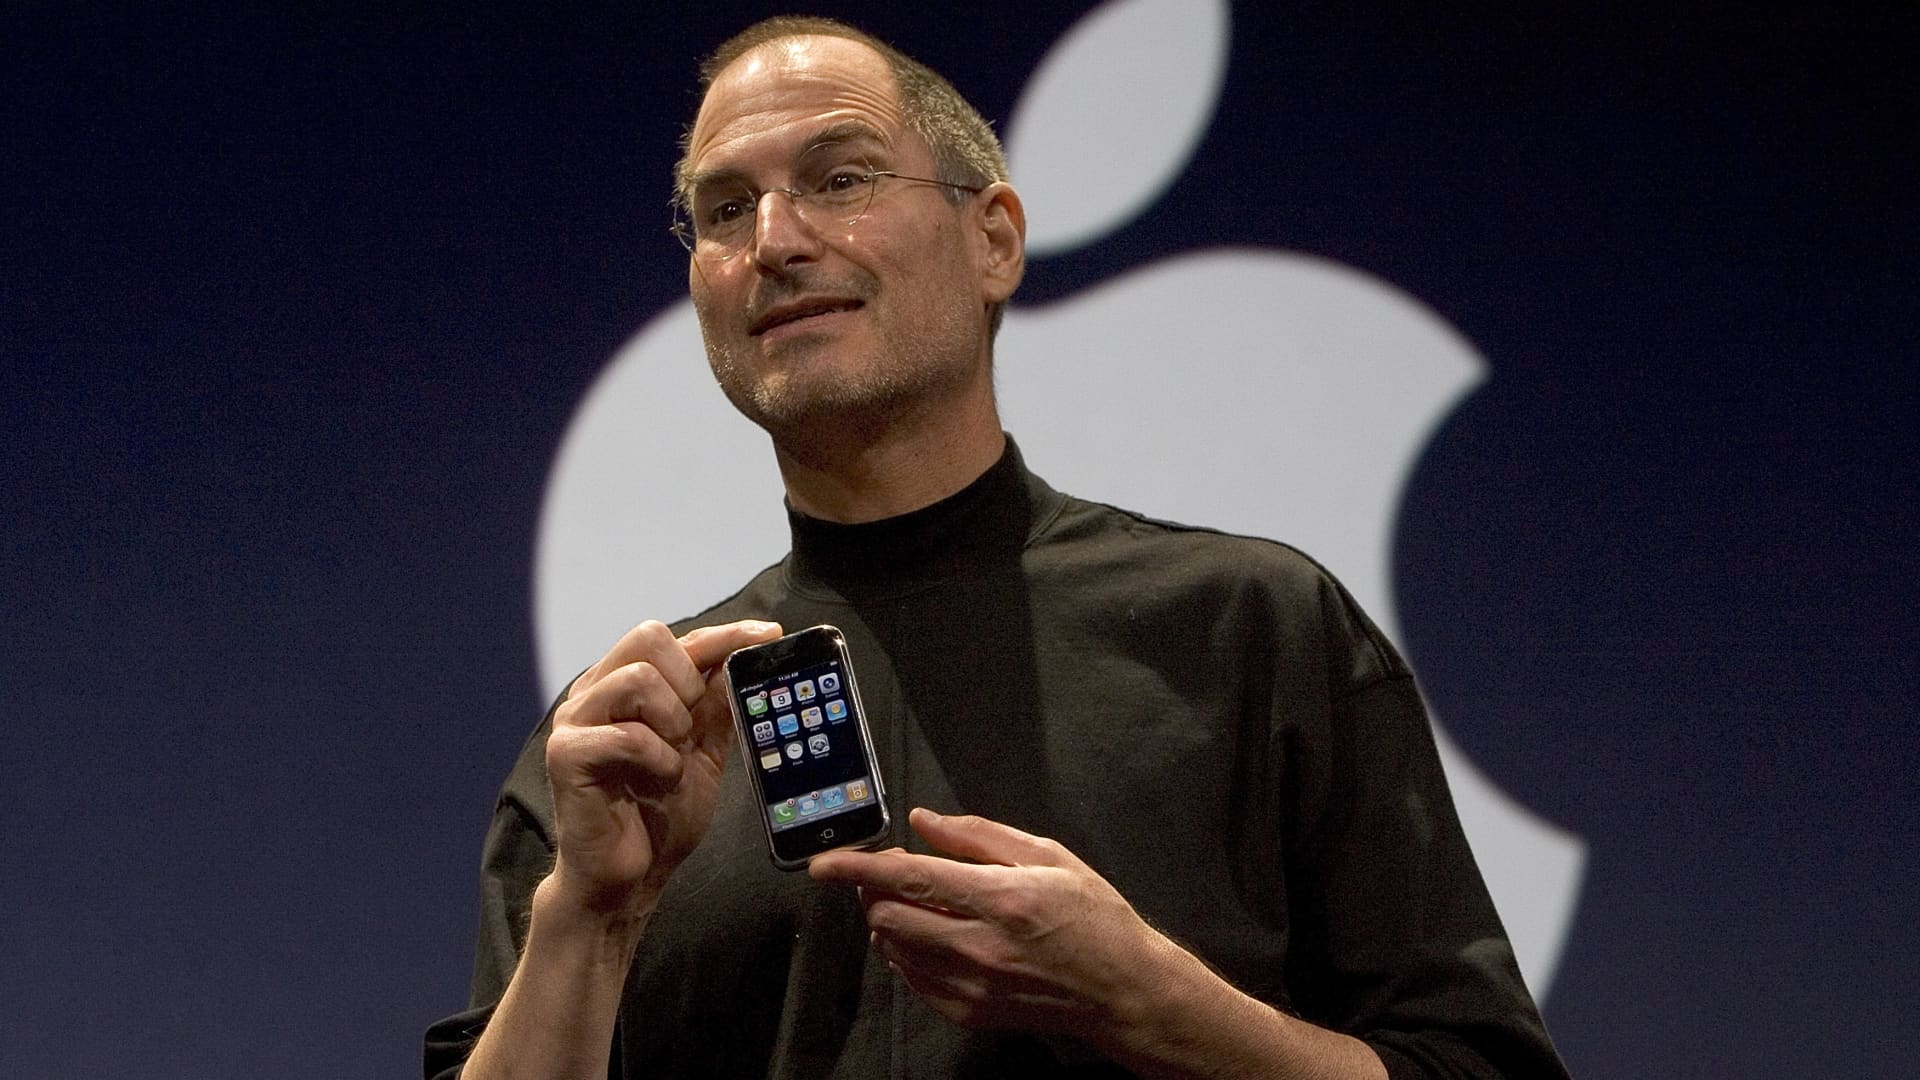 The late Apple CEO Steve Jobs unveiling the first iPhone in 2007.